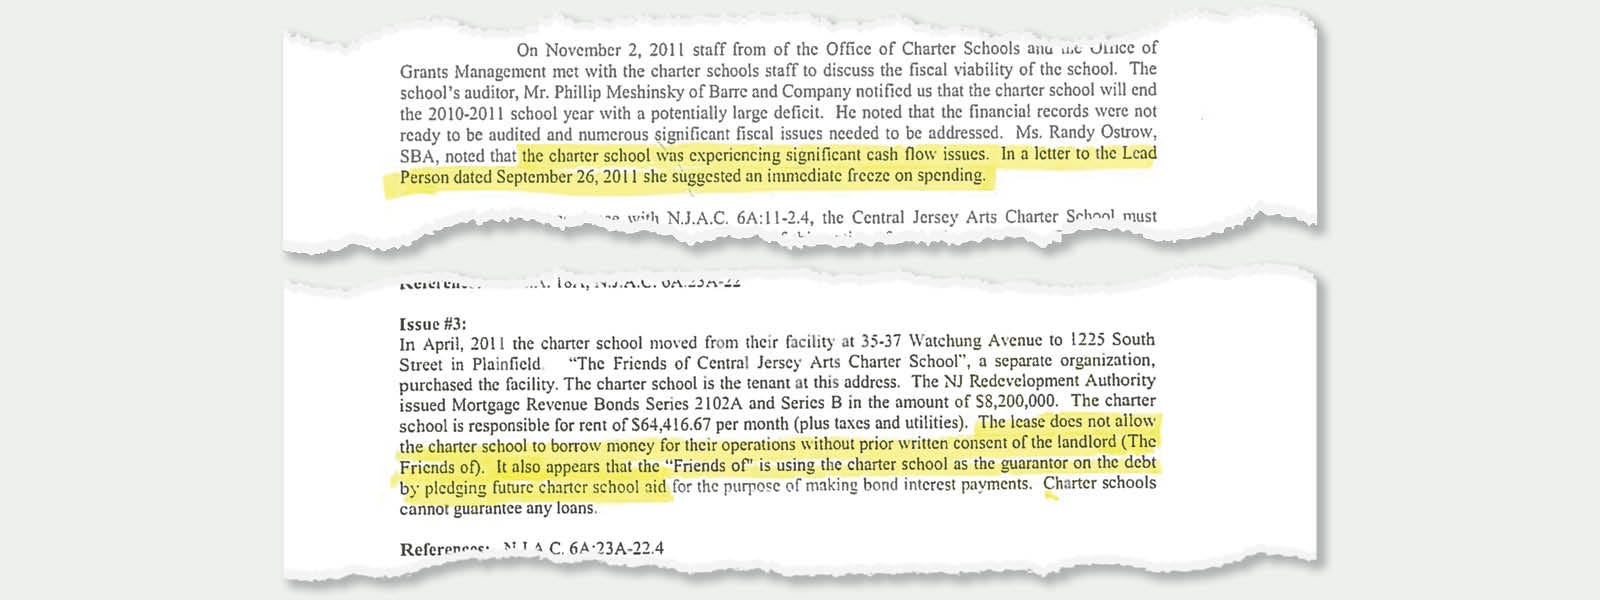 Portions of a letter from Christopher D. Serf, acting commissioner of the Department of Education, notifying the school that it had been placed on probation.